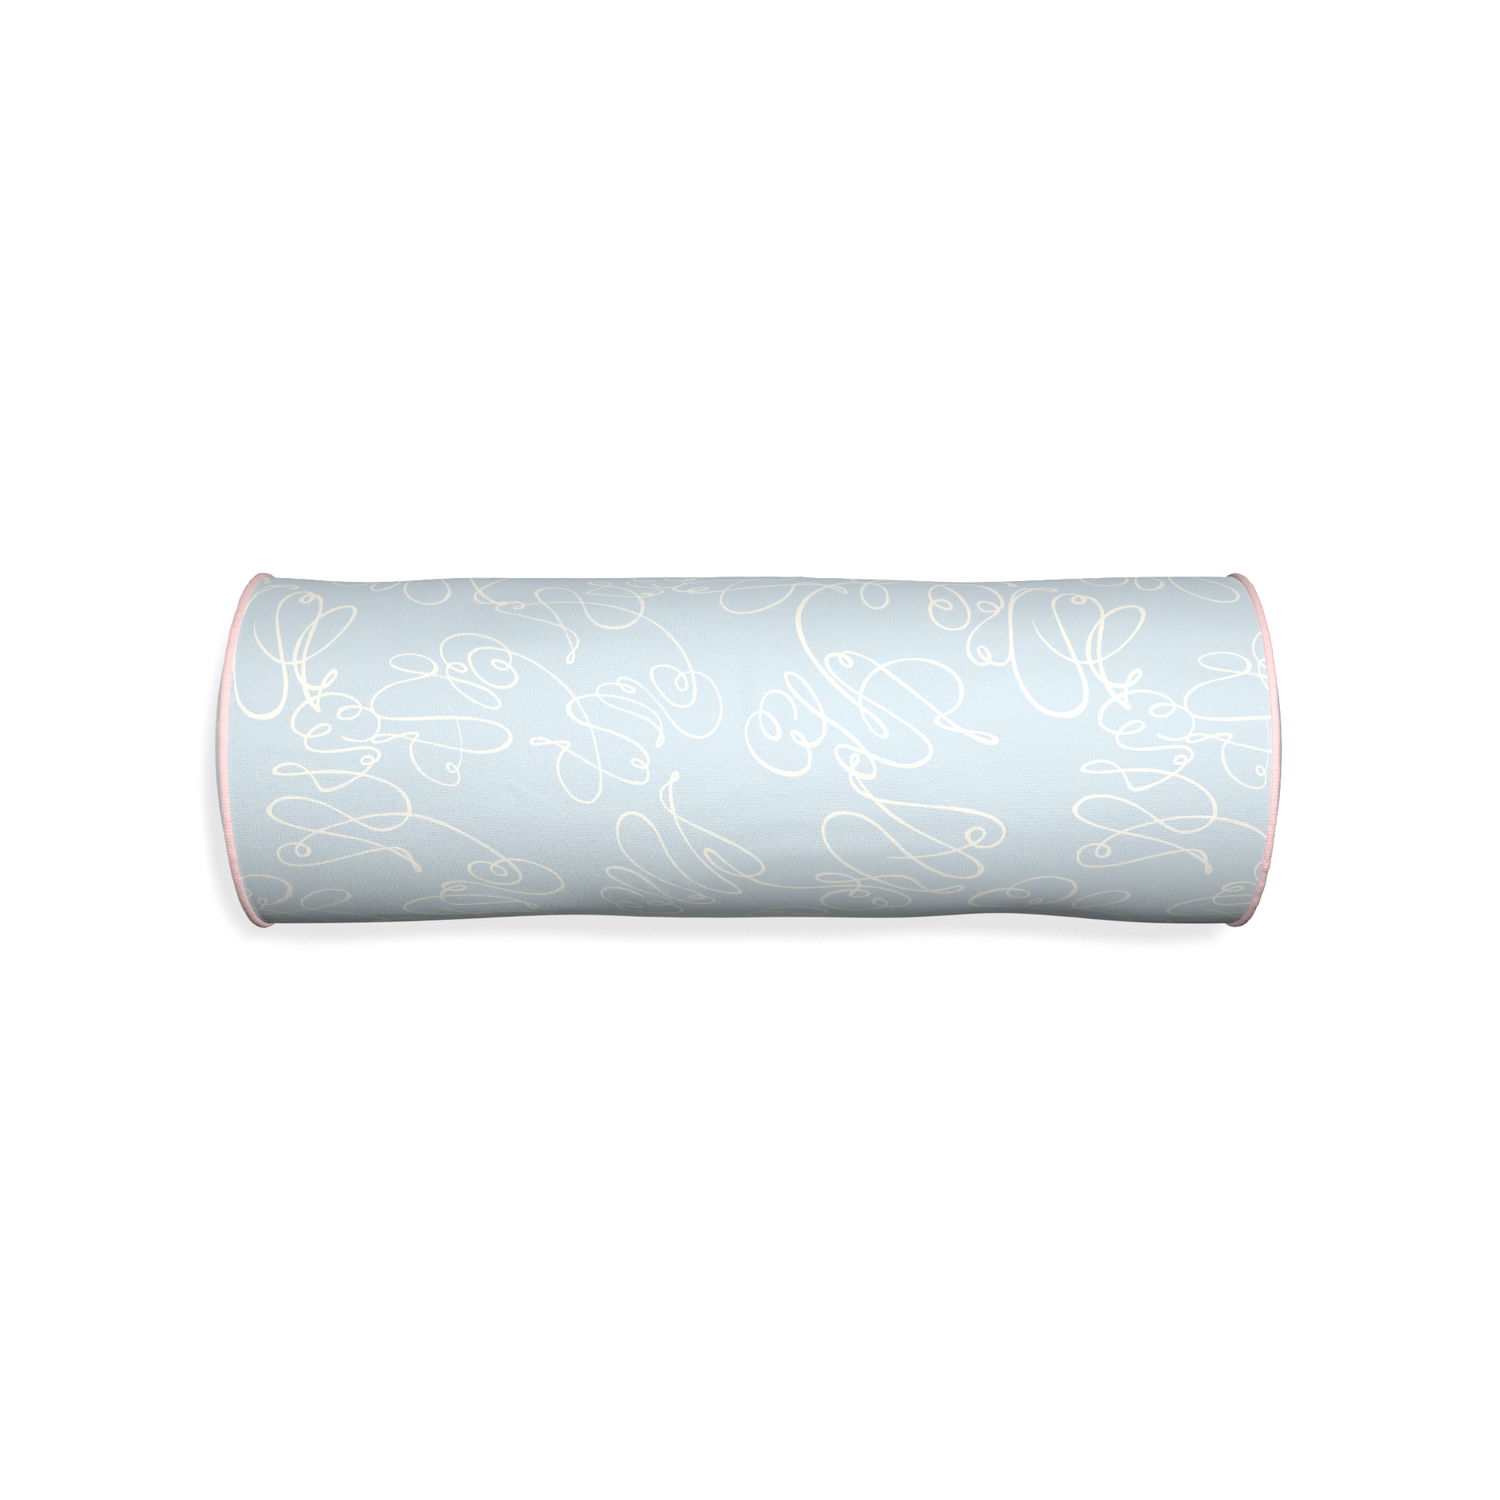 Bolster mirabella custom pillow with petal piping on white background